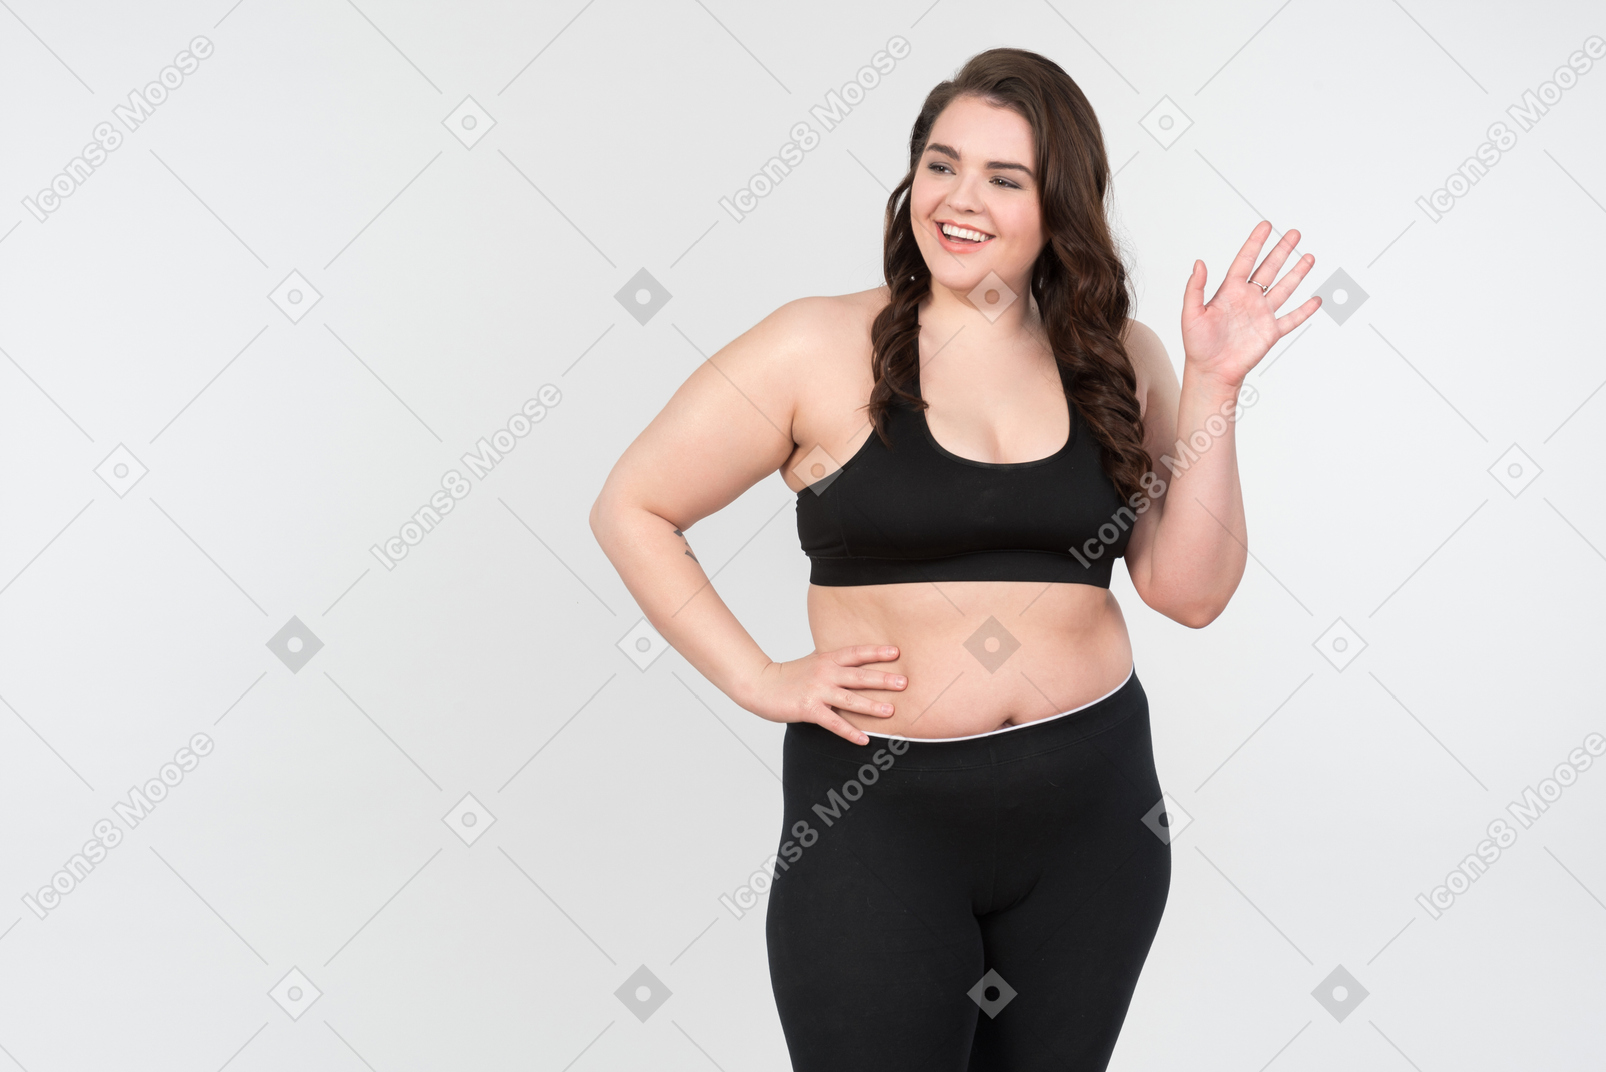 Smiling young plus-size model waving